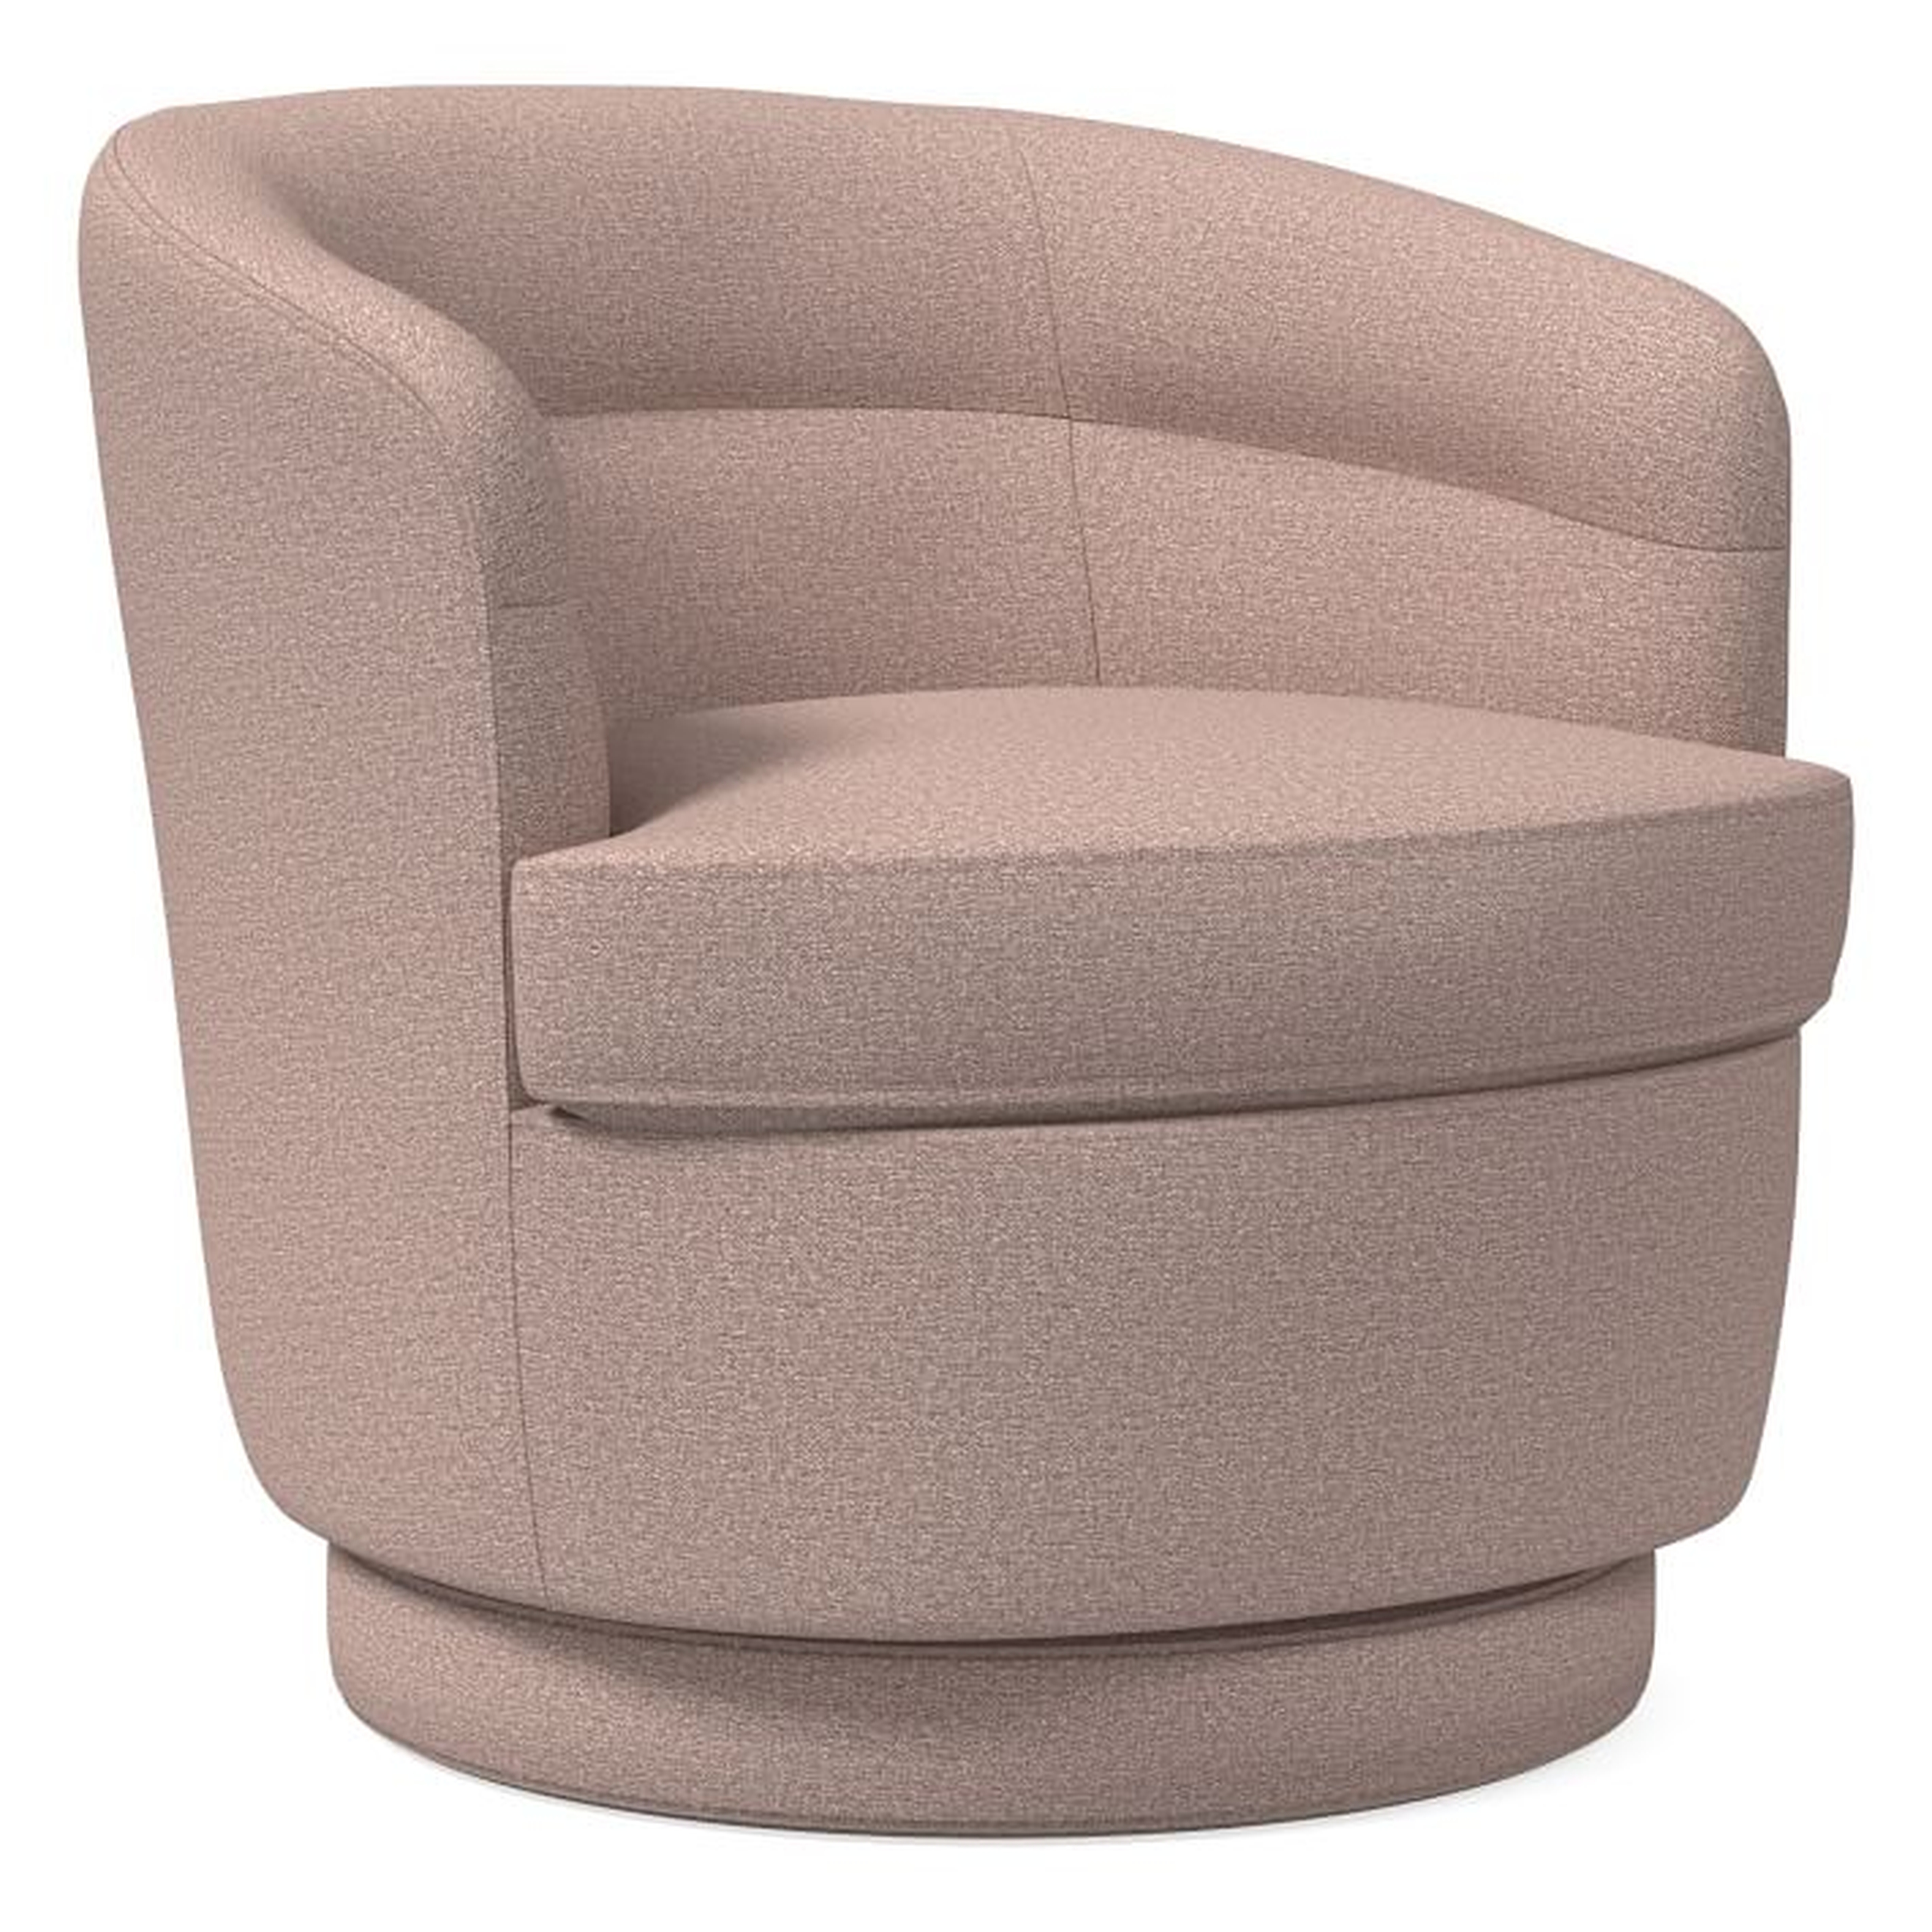 Viv Swivel Chair, Chenille Tweed, Rosette, Concealed Supports - West Elm